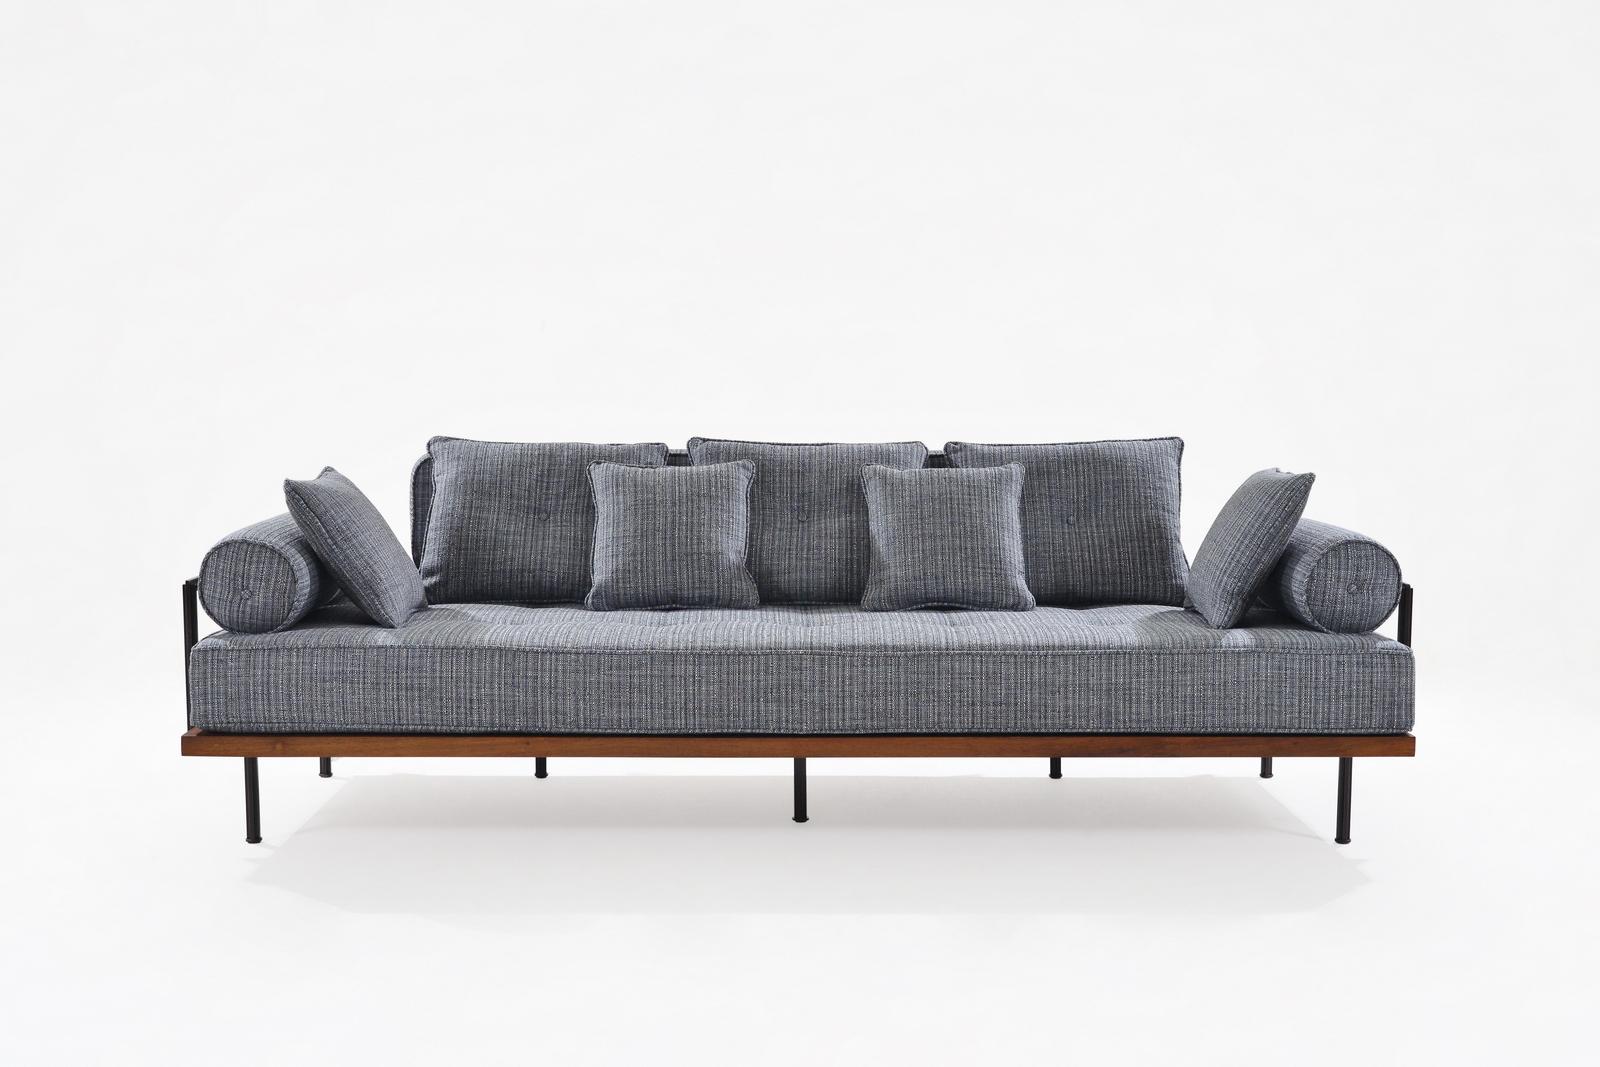 Introducing our contemporary three-seater sofa, a testament to 21st-century vintage elegance. Meticulously crafted with the precision synonymous with P. Tendercool, this sofa is constructed from reclaimed wood, solid brass, and indulgent